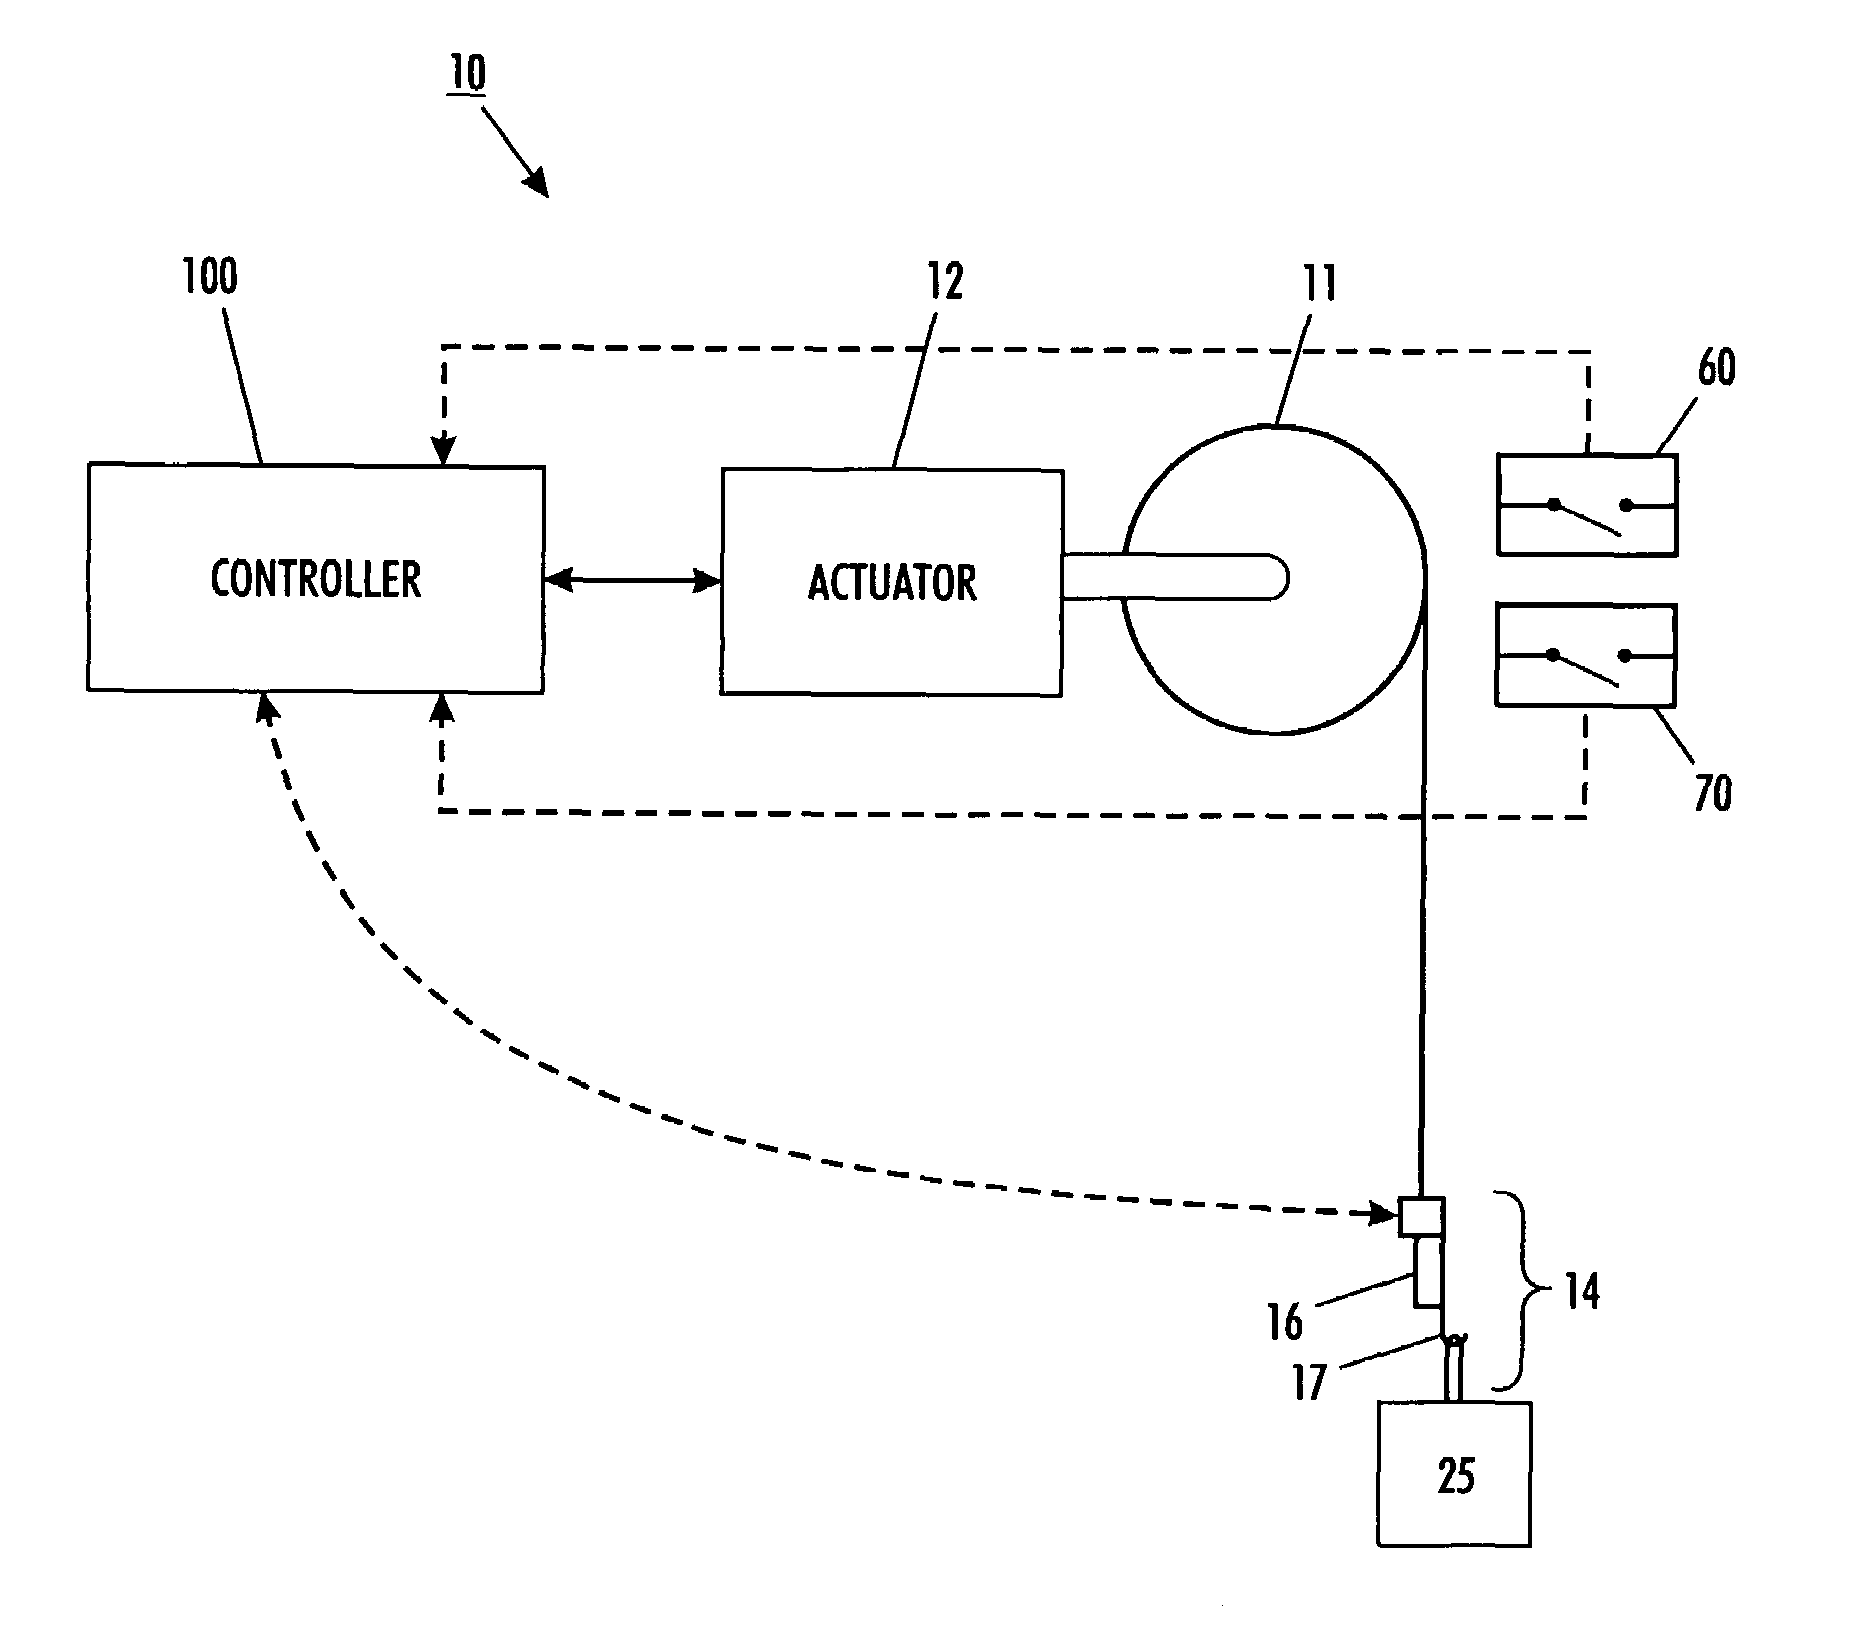 Cable slack and guide monitoring apparatus and method for a lift device